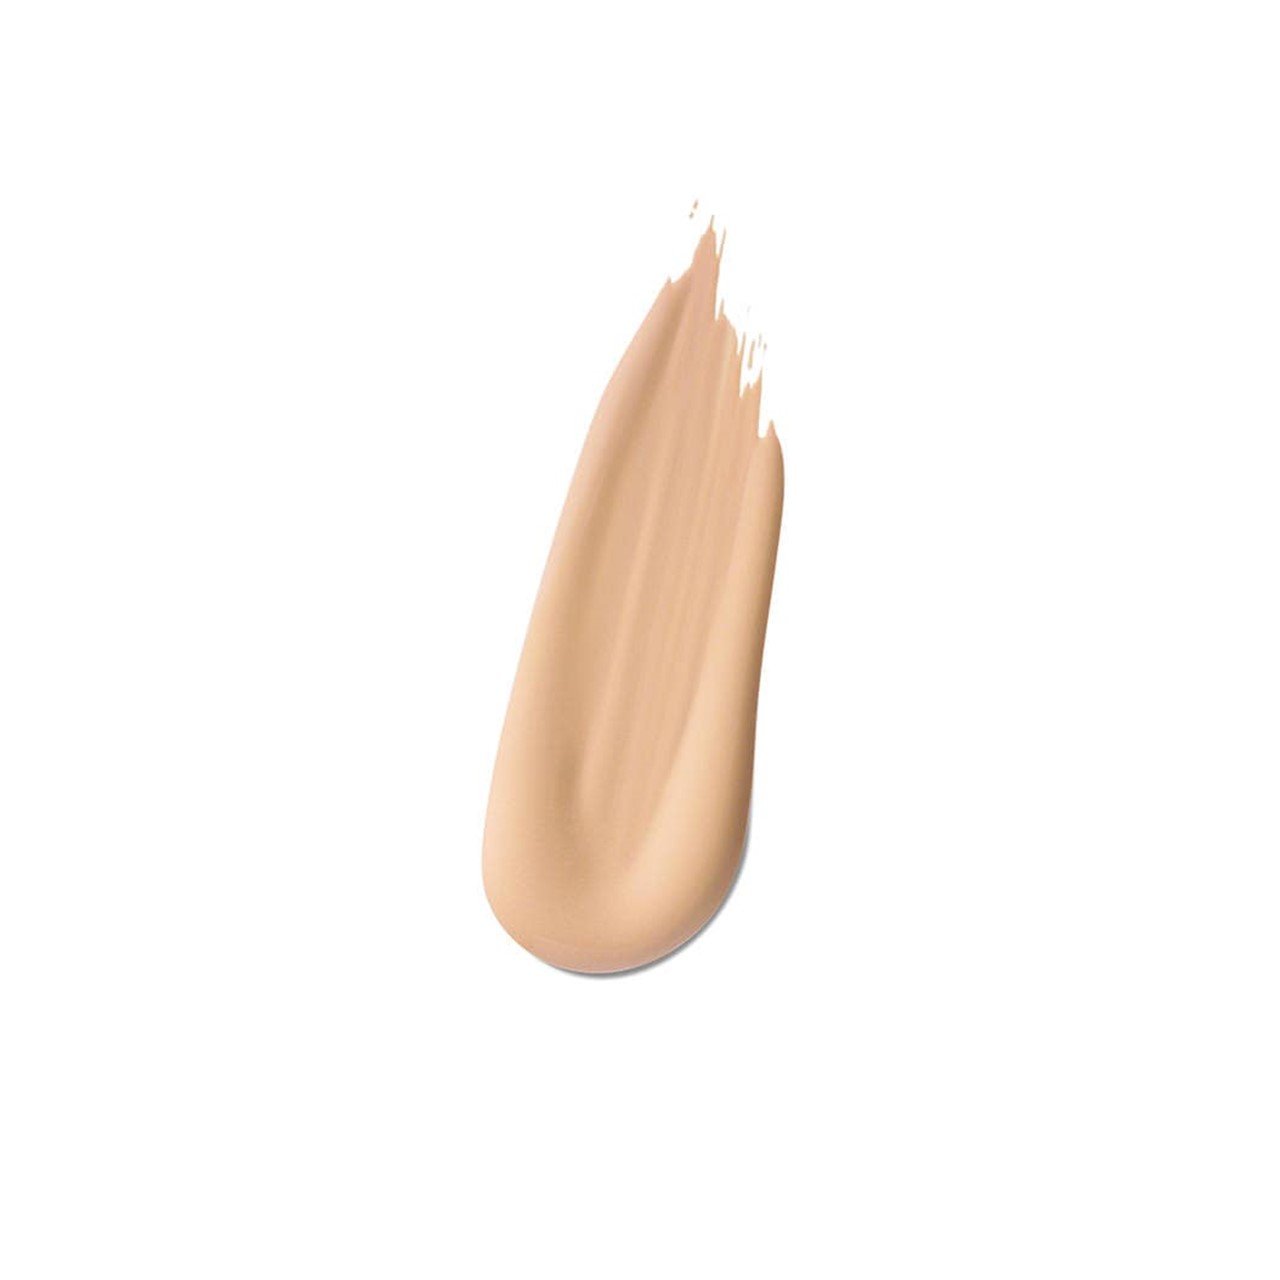 Estee Lauder Double Wear Stay-in-Place Makeup Foundation, No. 2n2 Buff